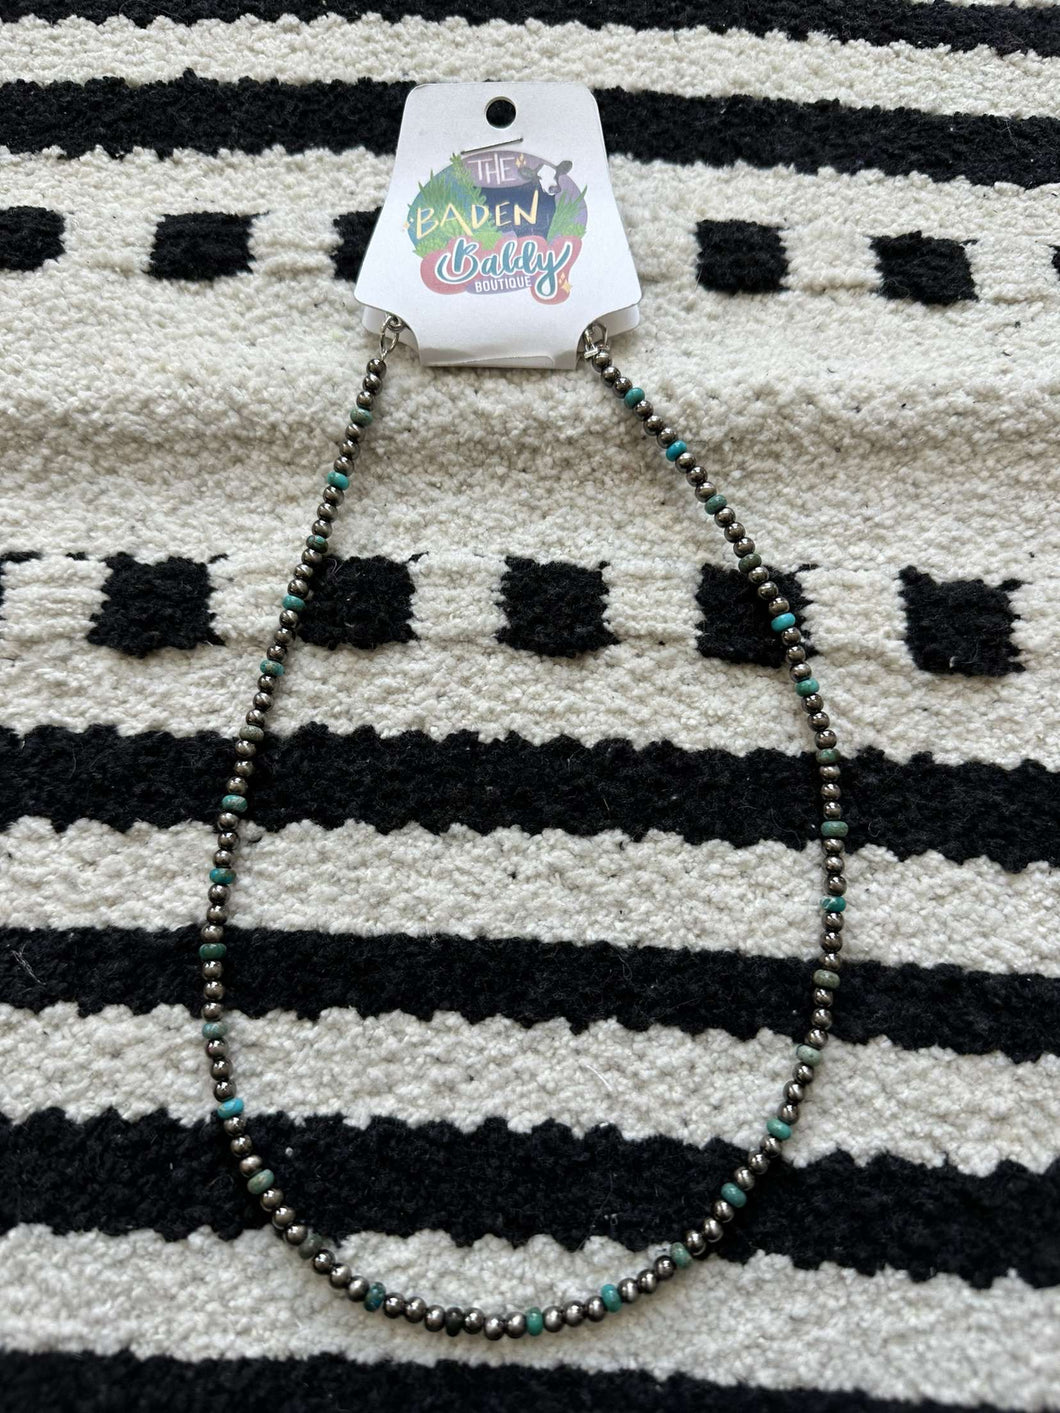 4mm Polished Navajo Pearl Necklace with Gemstone